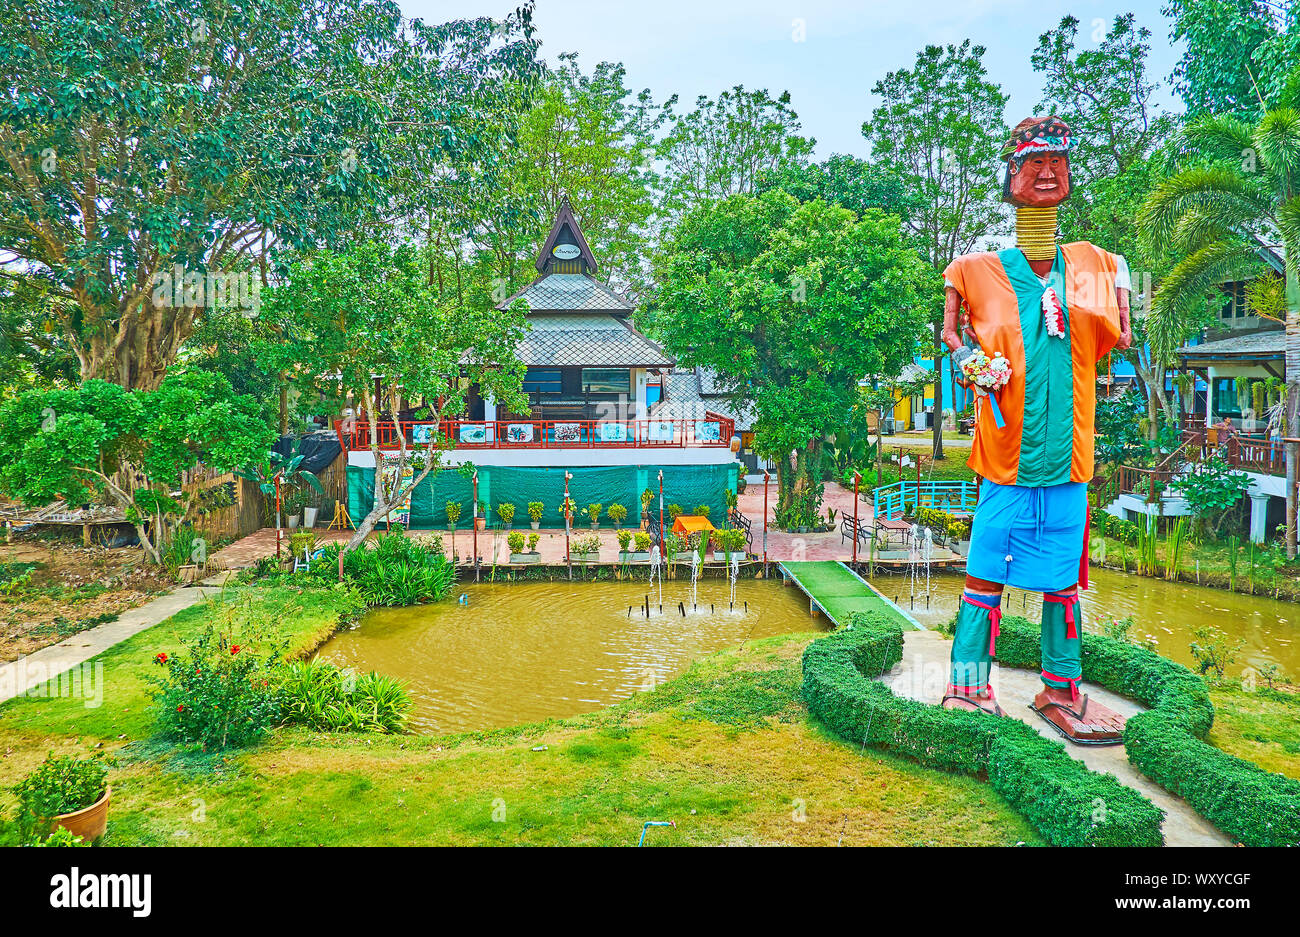 PAI, THAILAND - MAY 5, 2019: The metal statue of Karen tribe long neck woman in colorful clothes, standing among the small ponds in park of the countr Stock Photo